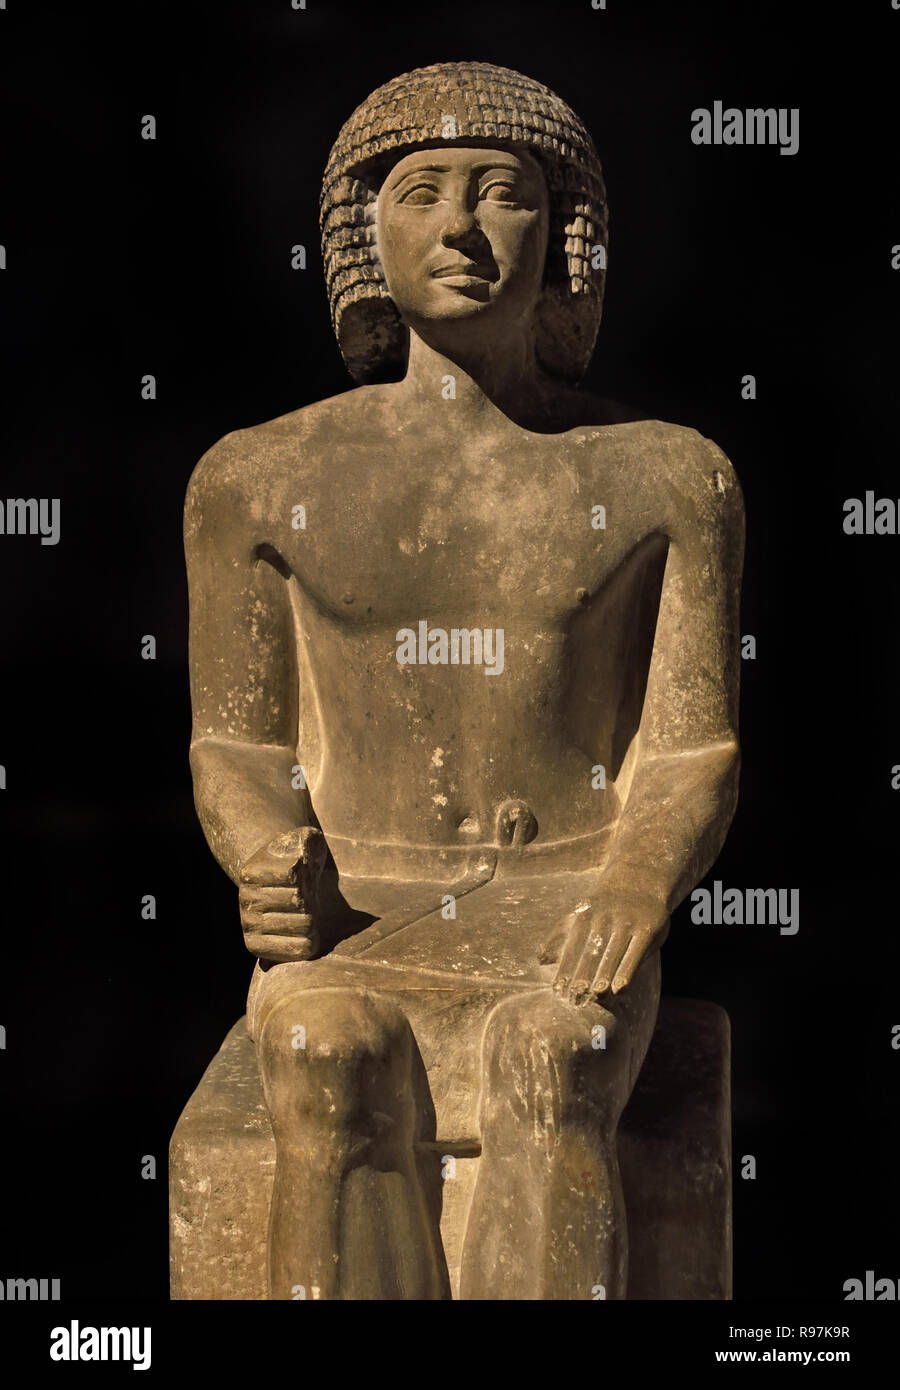 Sitting of a man (anonymous) 76 x 27 x 35 cm, 150 kg limestone, Period: Old Empire; 5th Dynasty 2465-2323 BC Egypt, Egyptian. Stock Photo